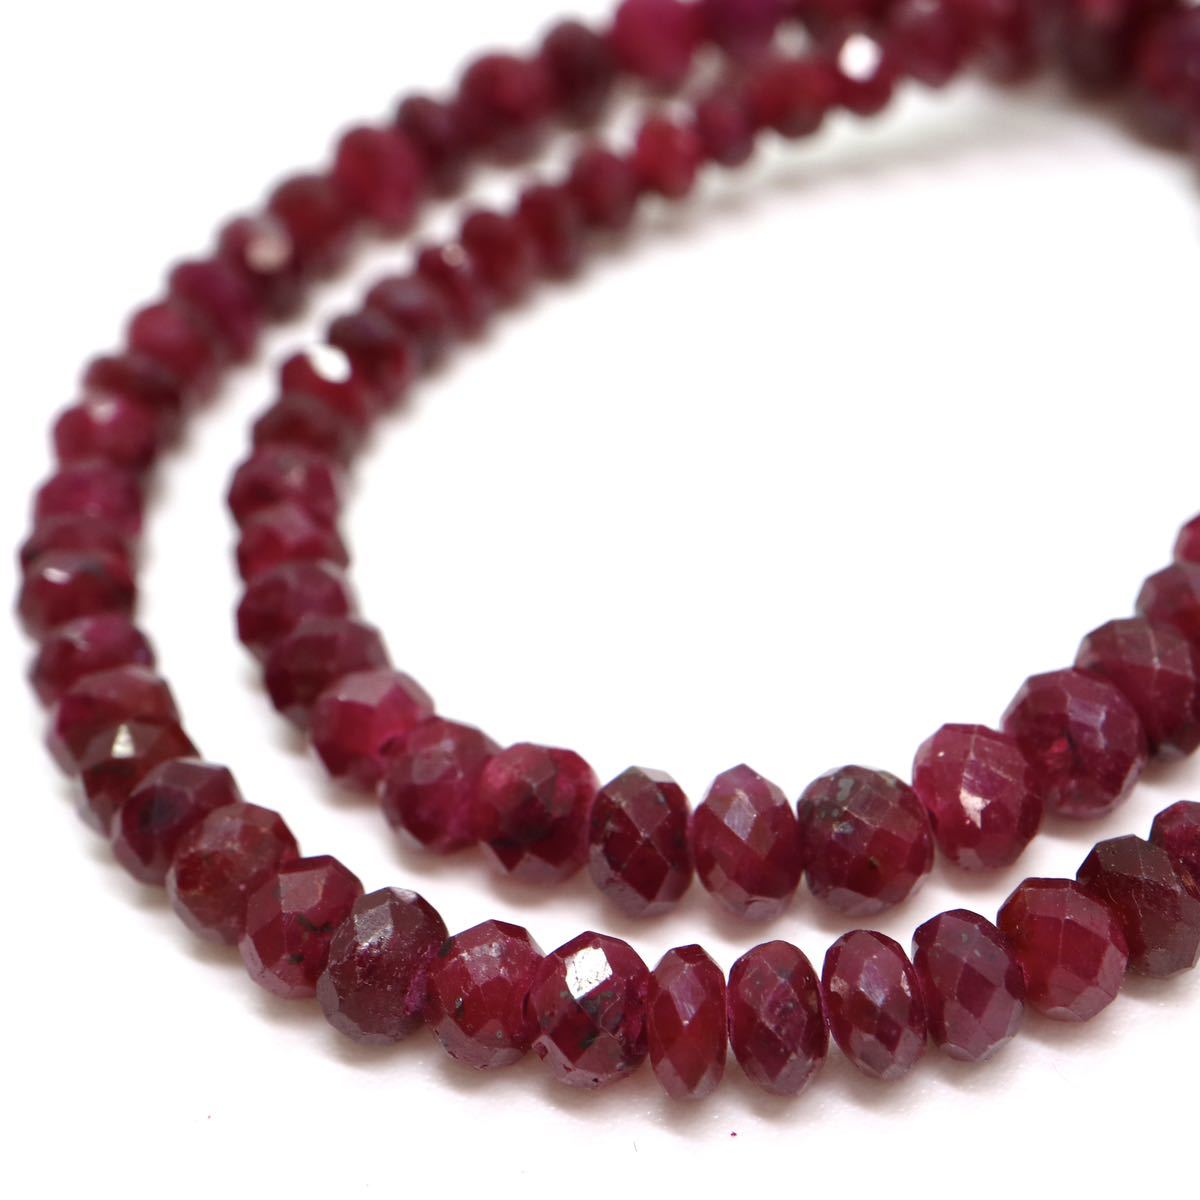 《K14天然ルビーネックレス》J ◎18.0g 5 39.5cm ruby necklaceジュエリー jewelry EA0/EA0_画像4